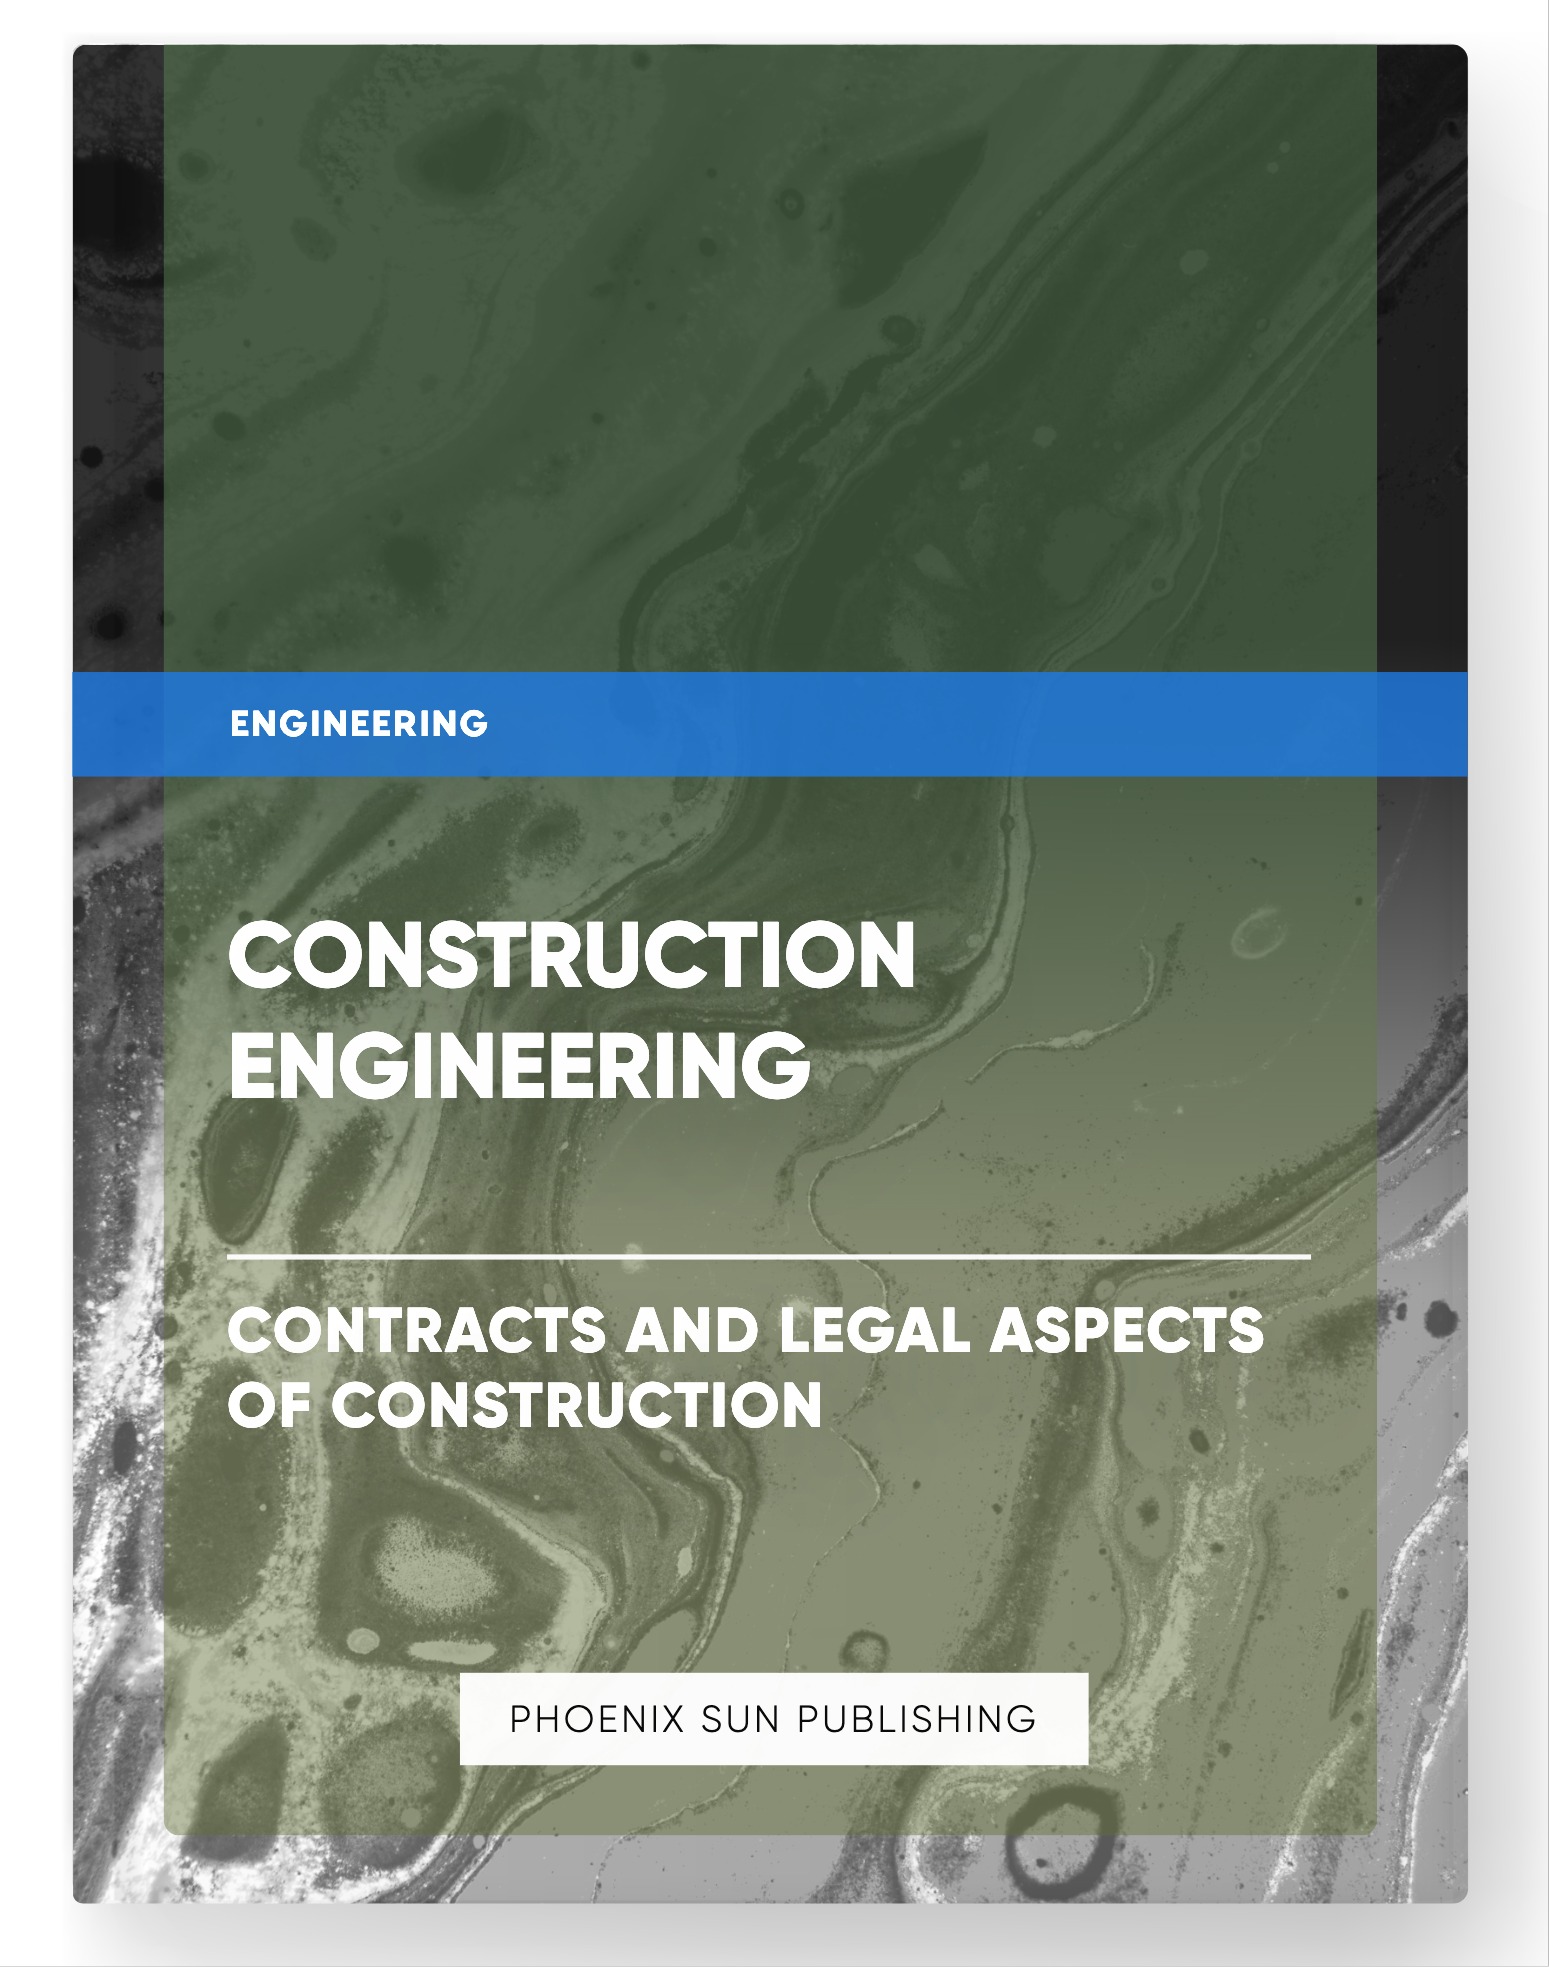 Construction Engineering – Contracts and Legal Aspects of Construction